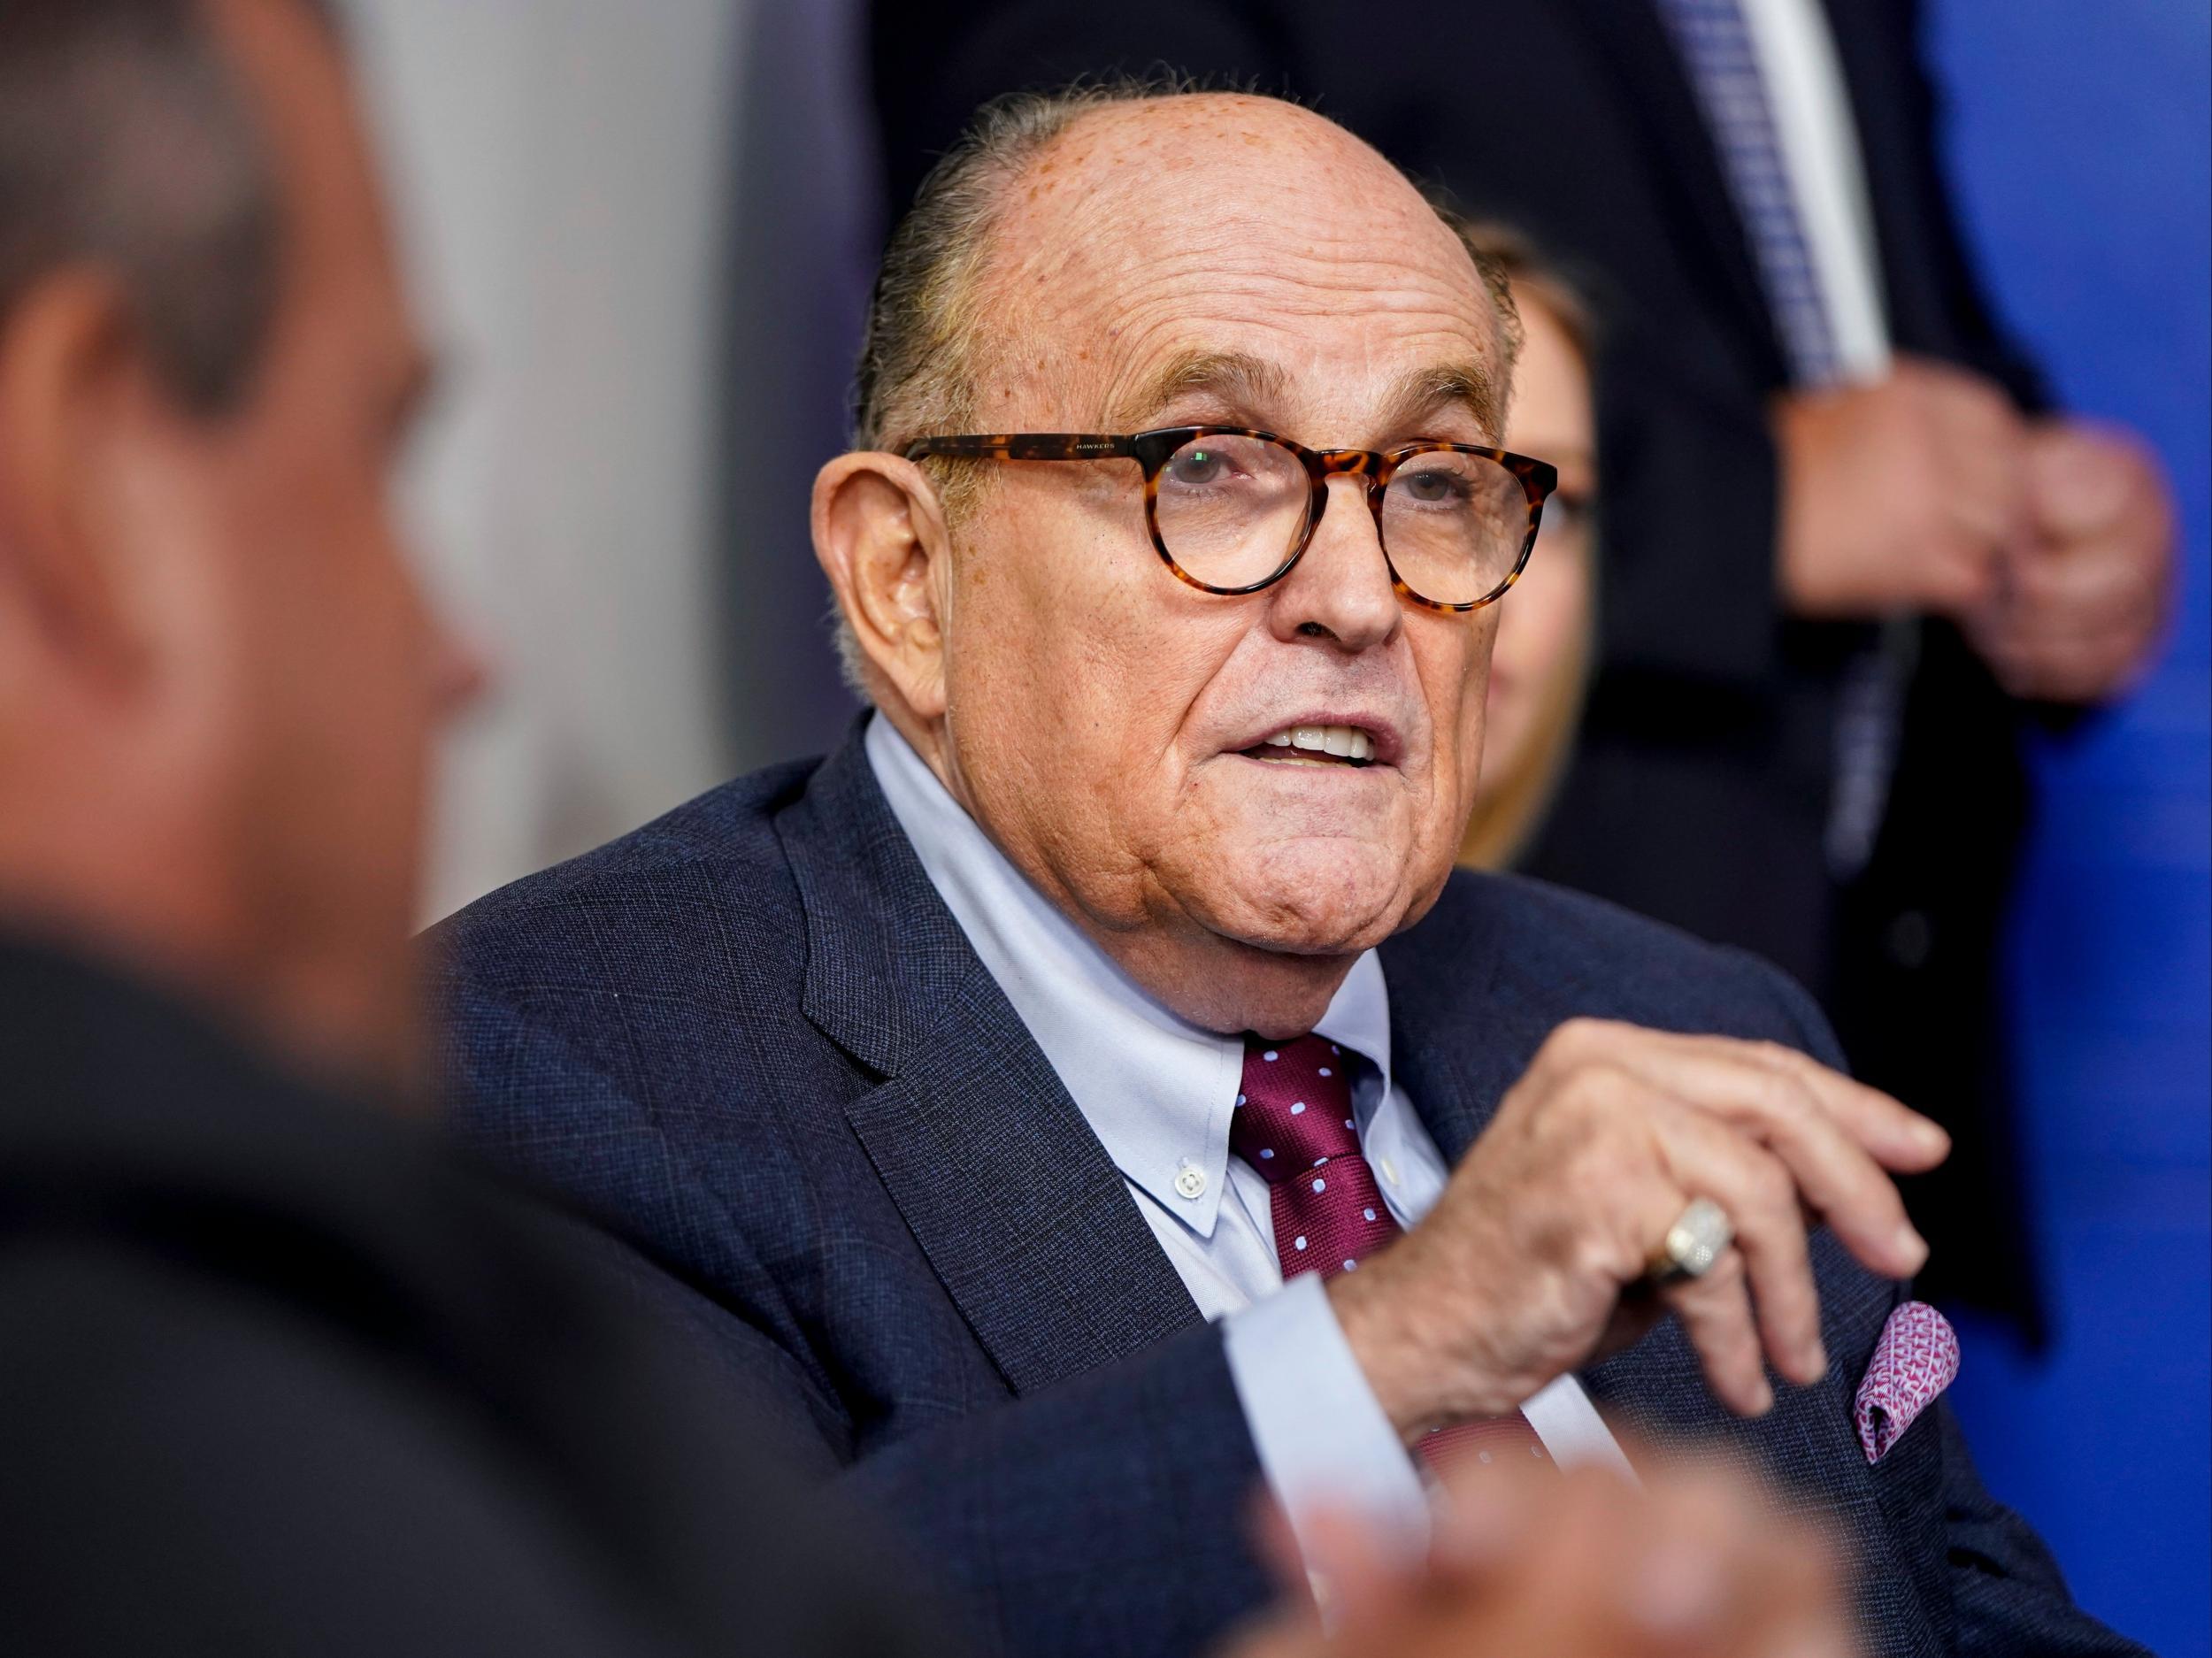 Giuliani reportedly wanted to claim a Republican victory before votes were counted in the 2020 election